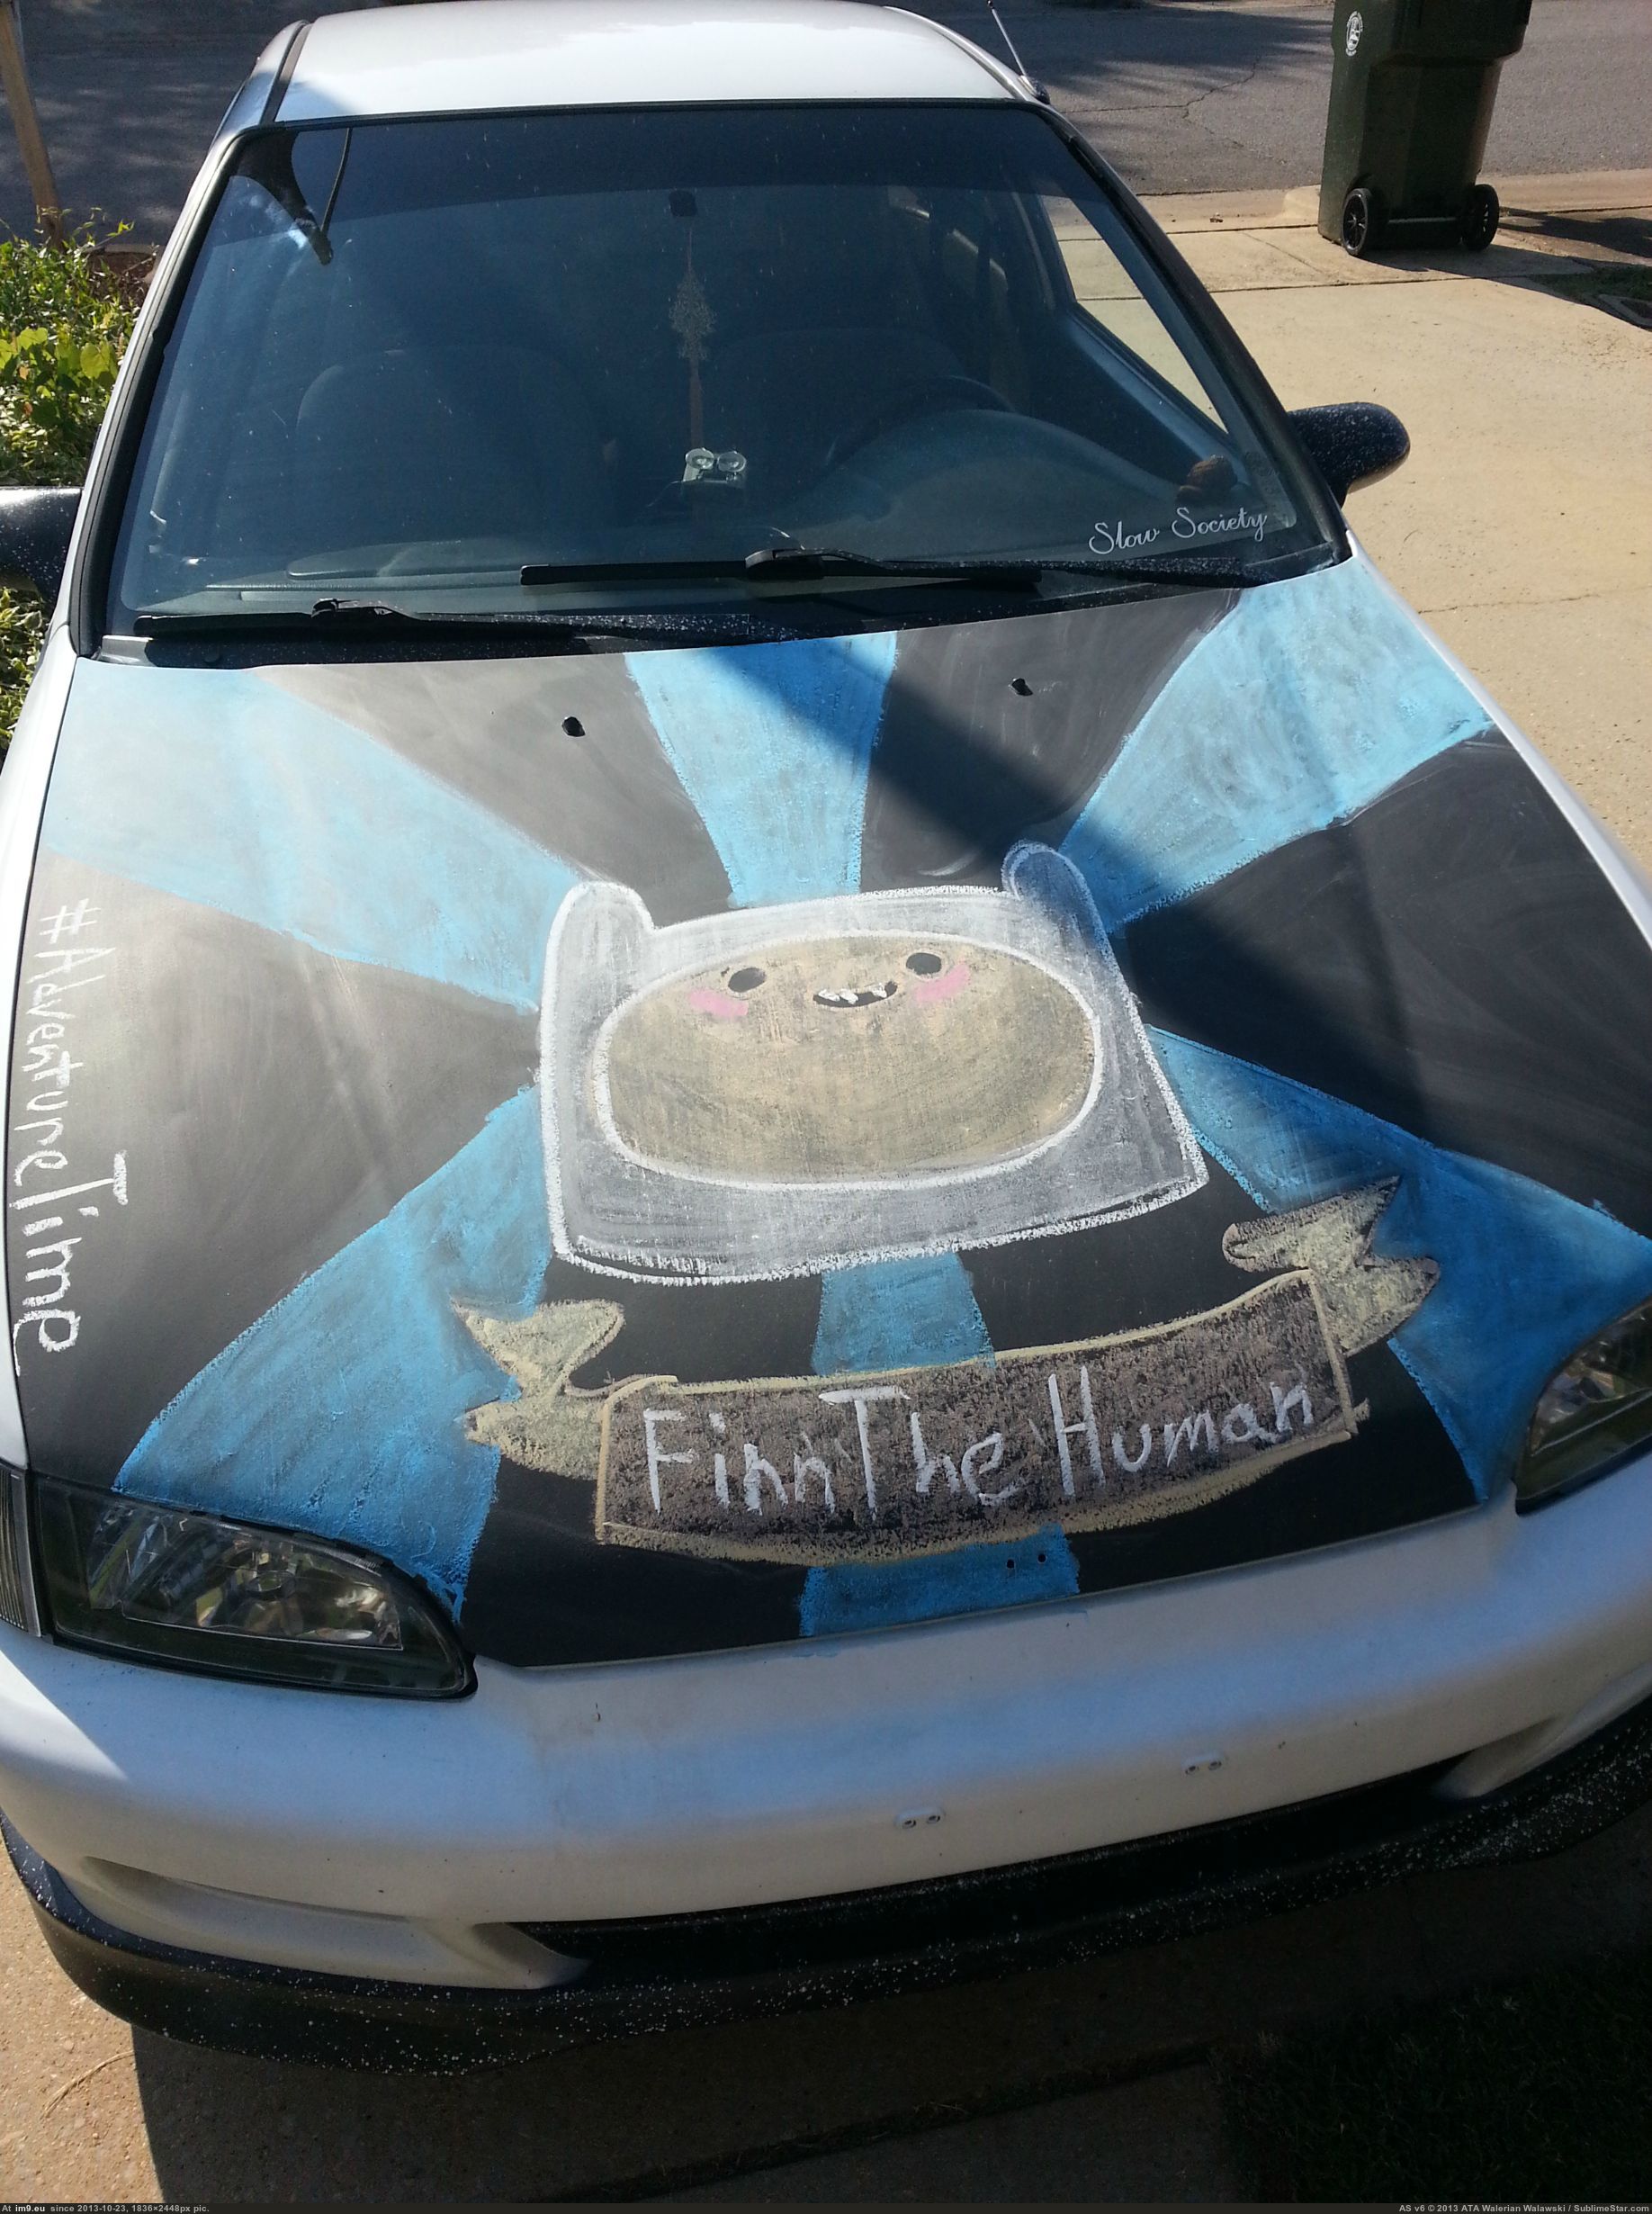 [Pics] I painted my hood in chalkboard paint and love every minute drawing on it! Part Deux, in for repairs edition. 2 (in My r/PICS favs)